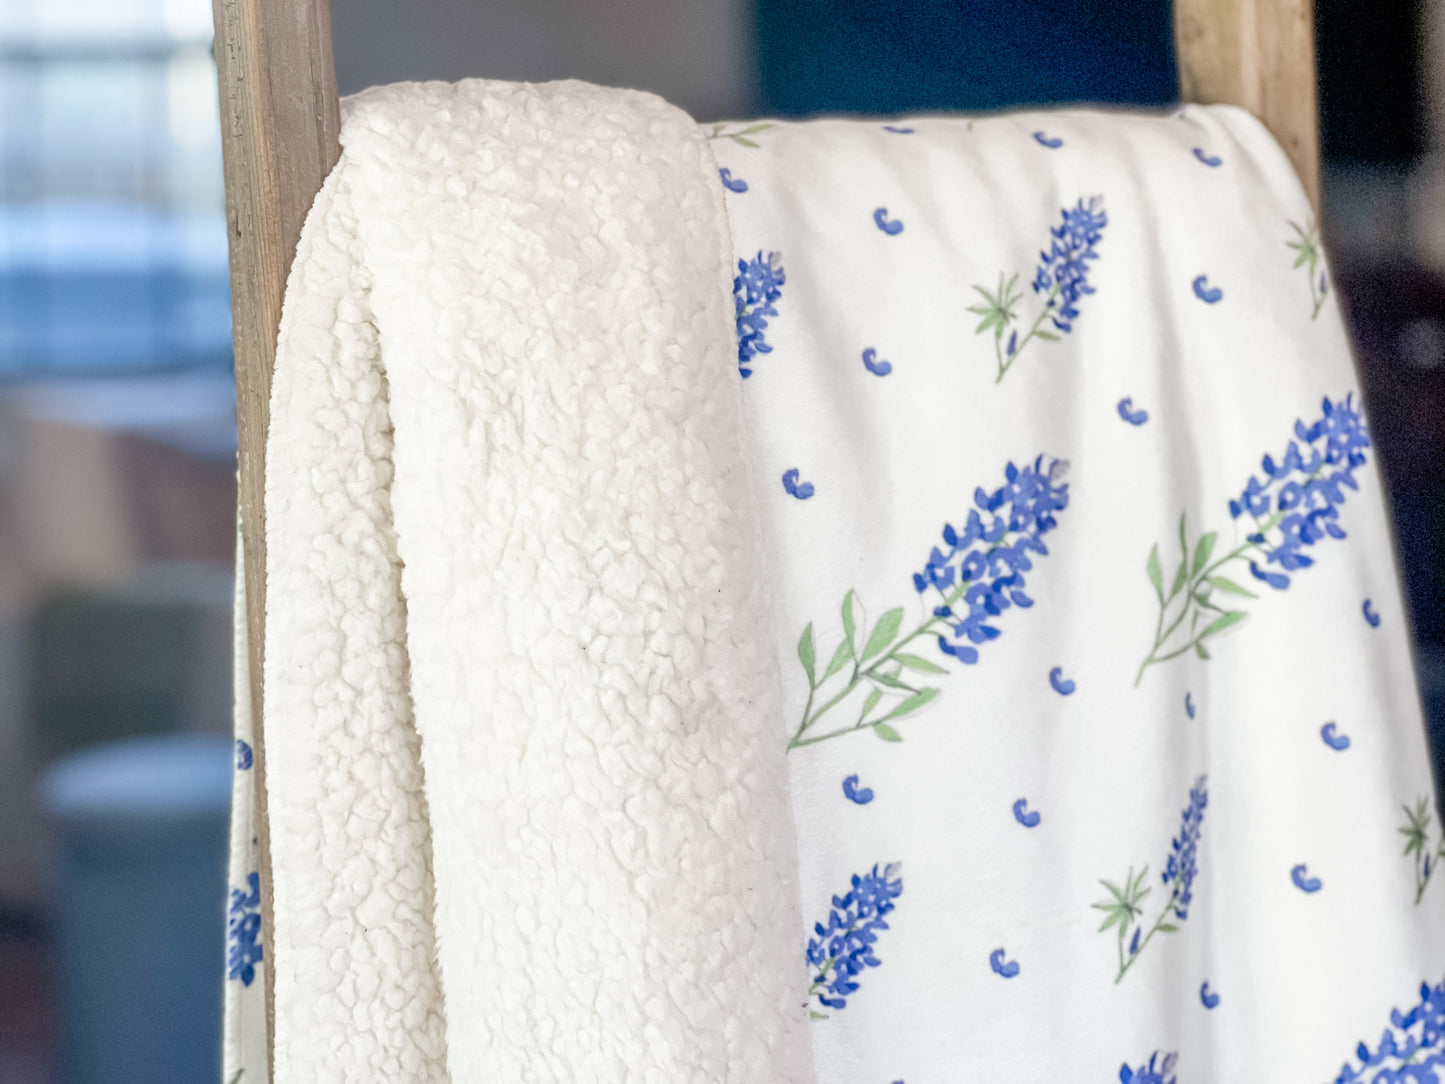 Soft plush throw blanket with vibrant bluebonnet flowers on a white background, measuring 60x80 inches.